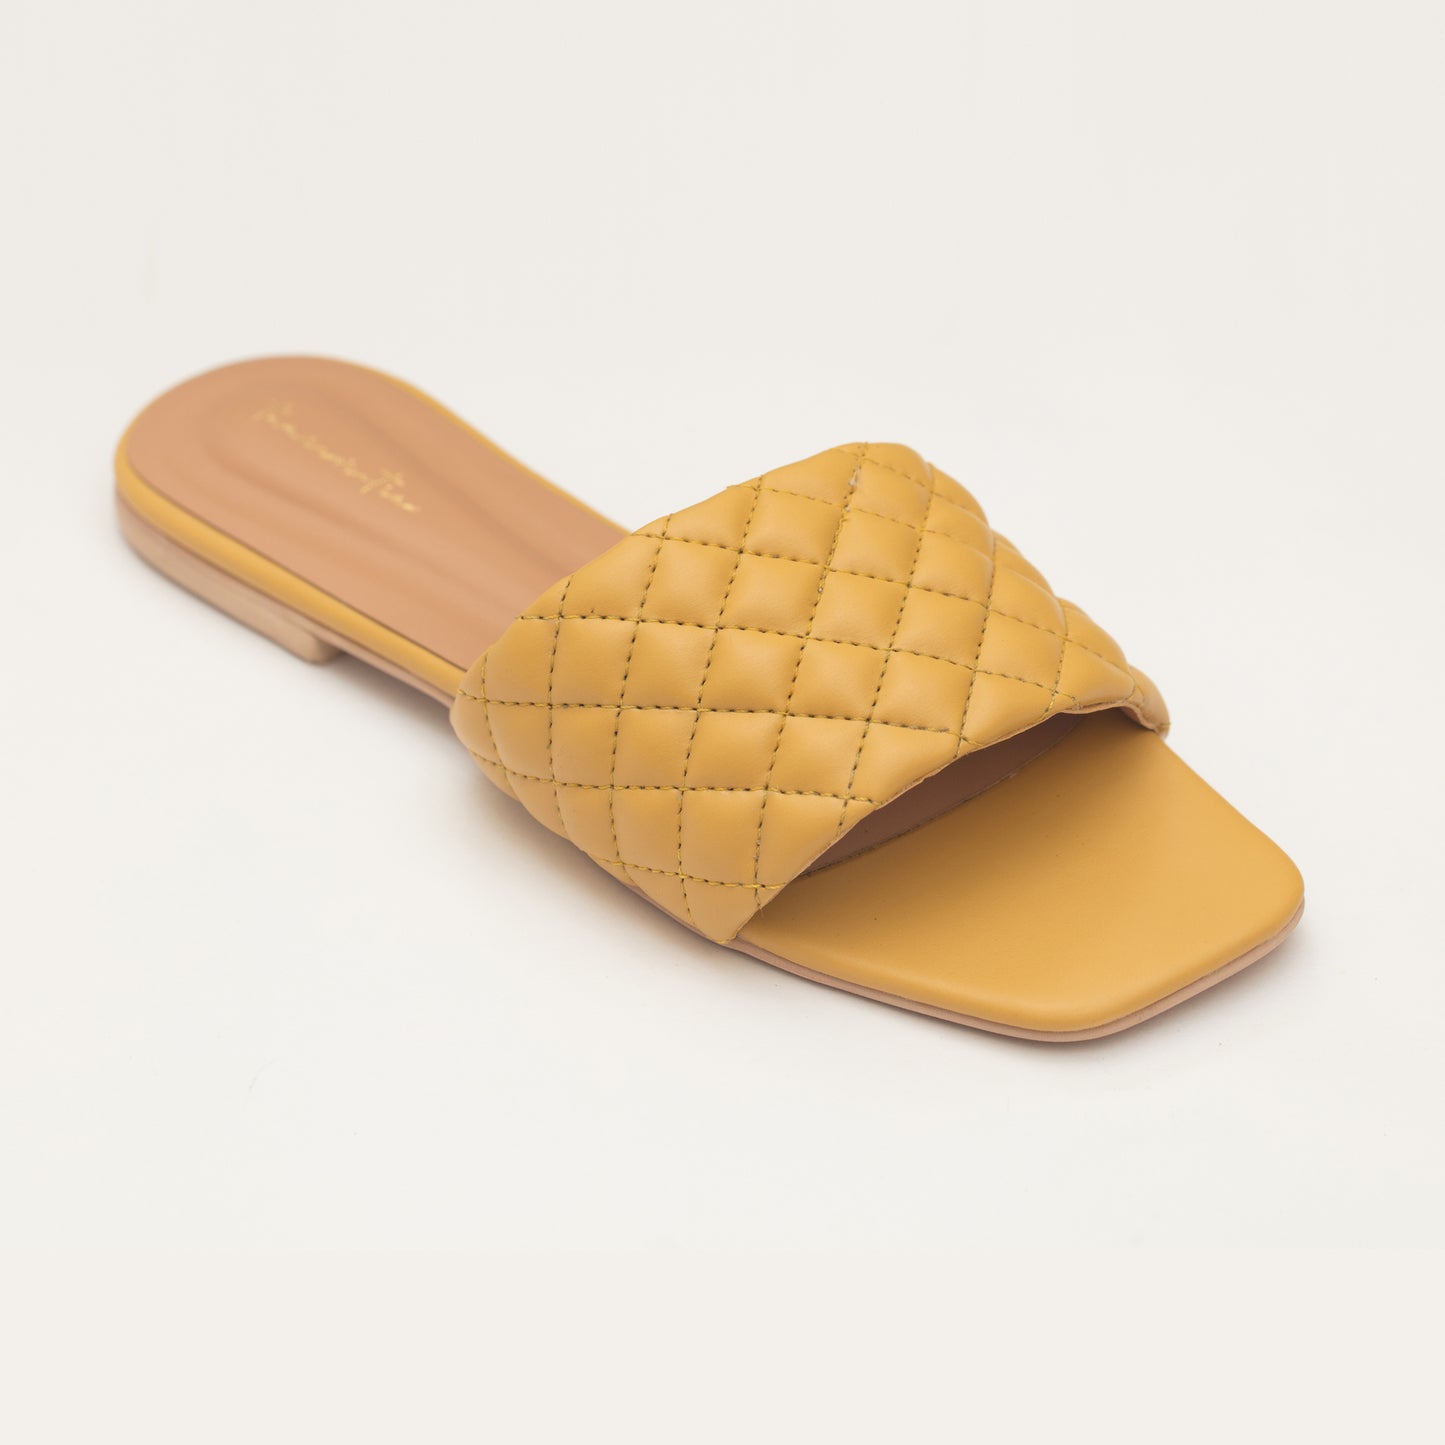 Quilted flats in Mustard